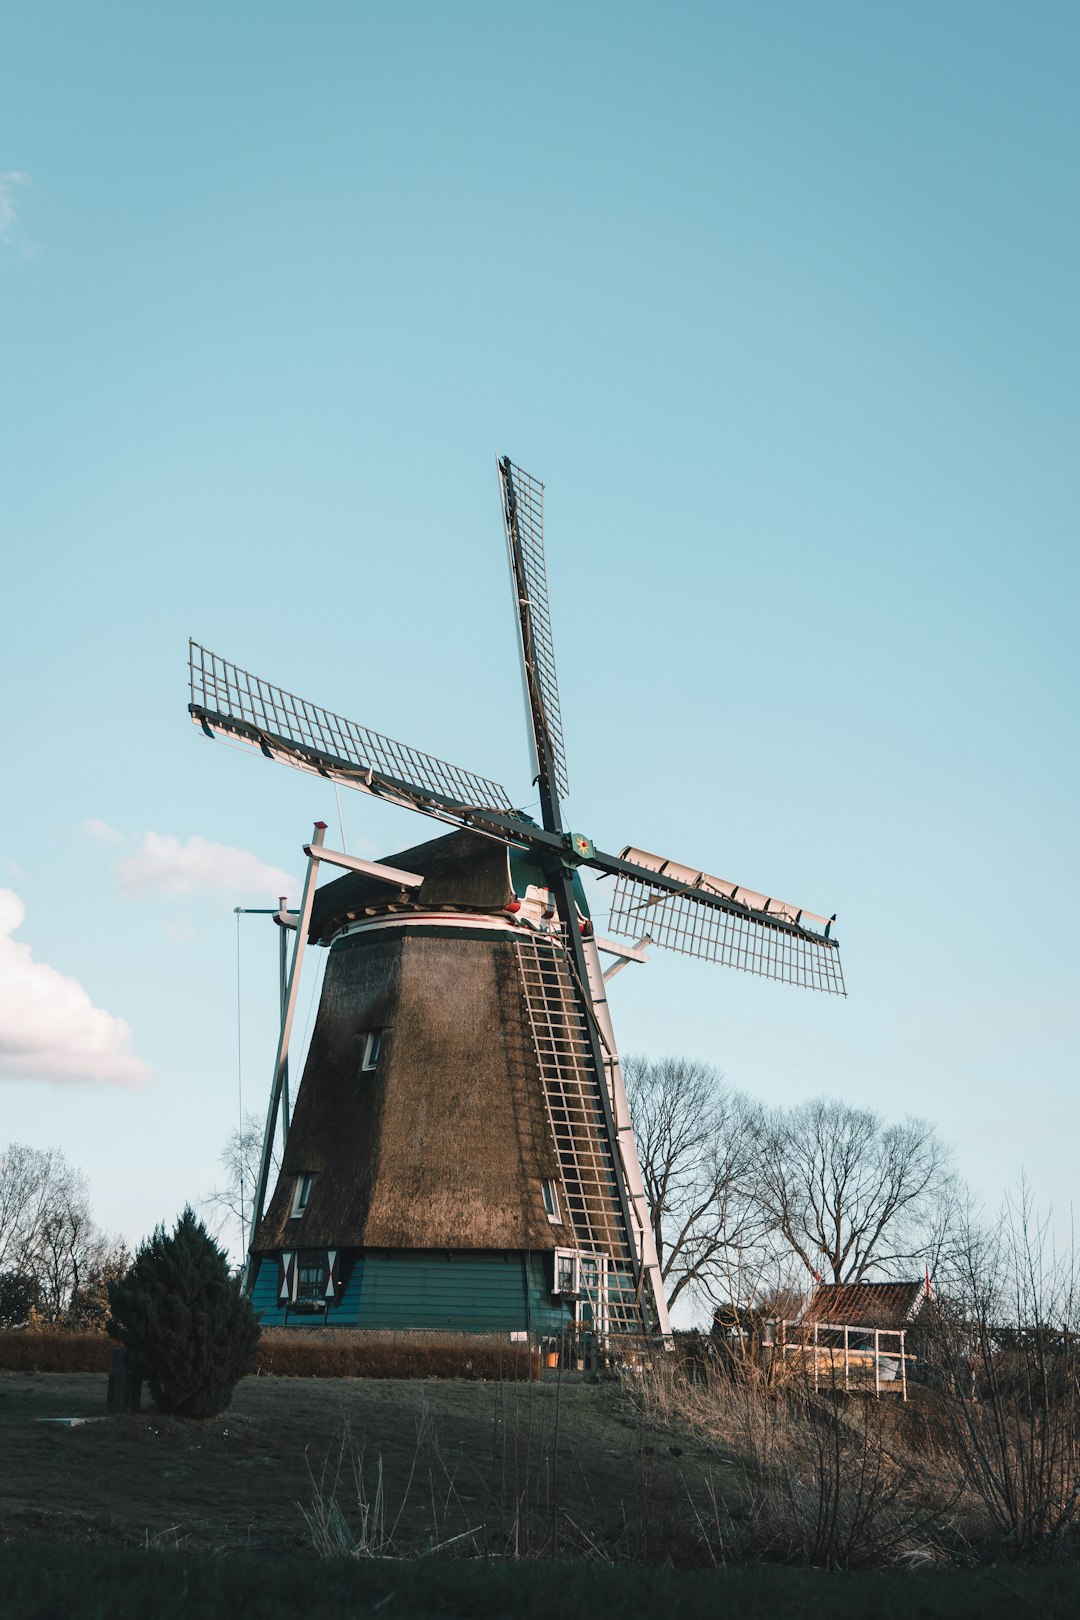 brown and green windmill under blue sky during daytime